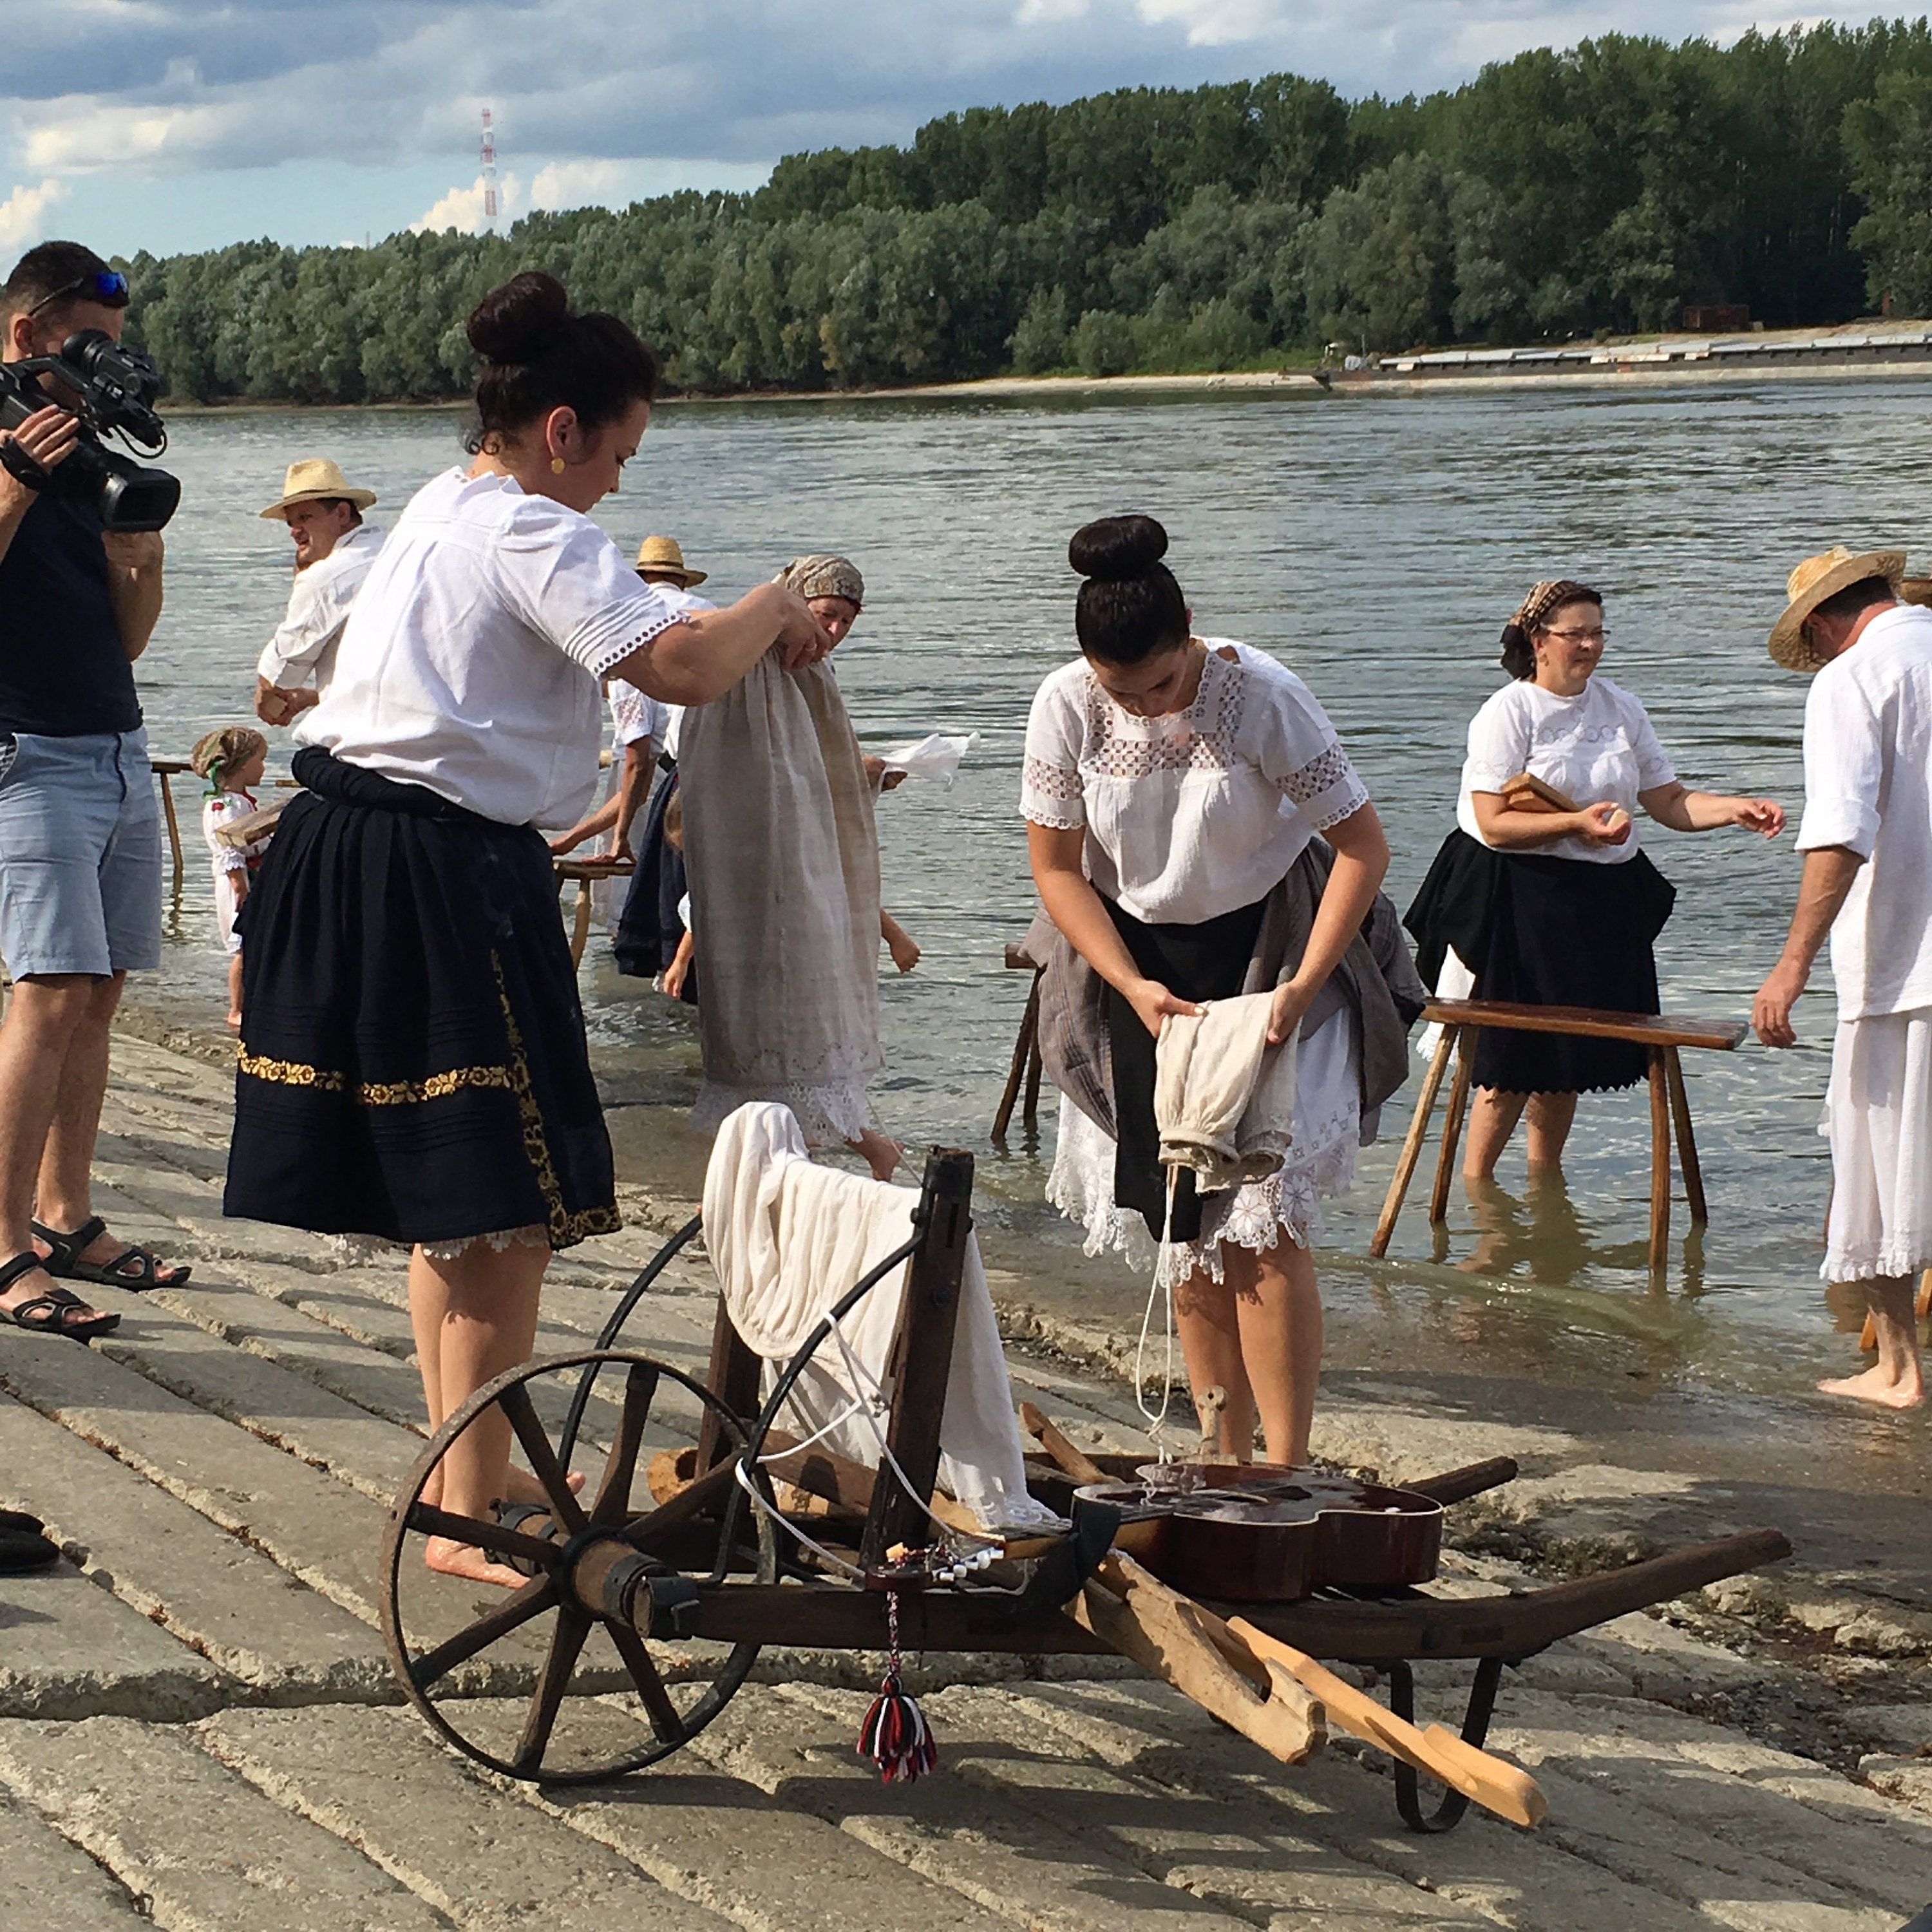 The Washing Festival on the shores of the Danube